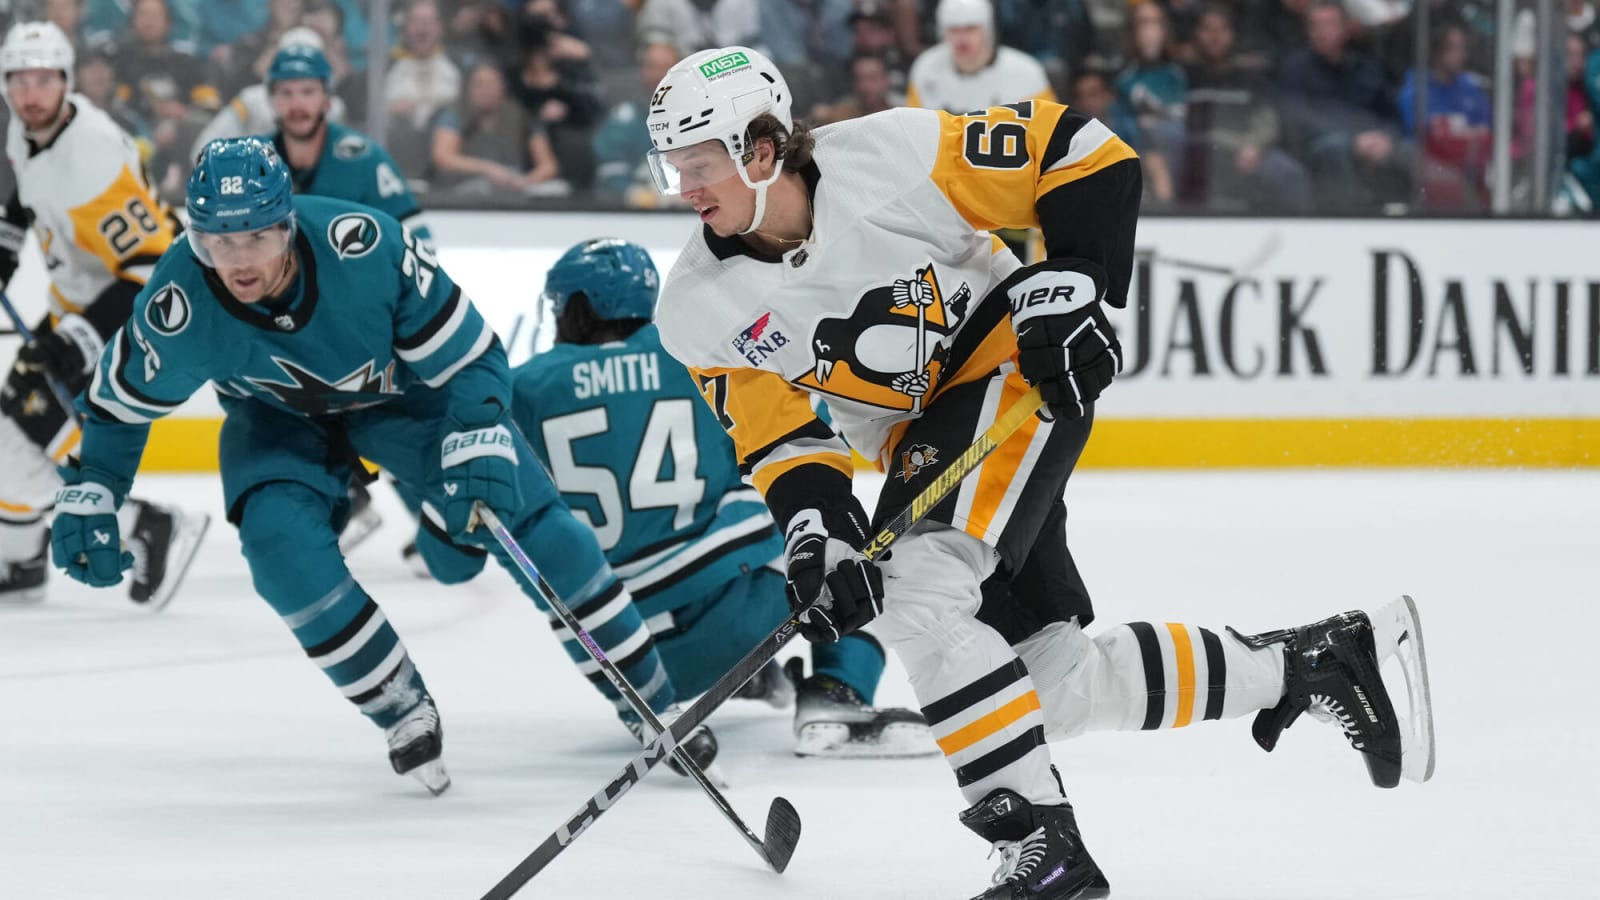 Penguins’ Rakell: ‘I’m Not a Worse Hockey Player Than I Was Last Year’